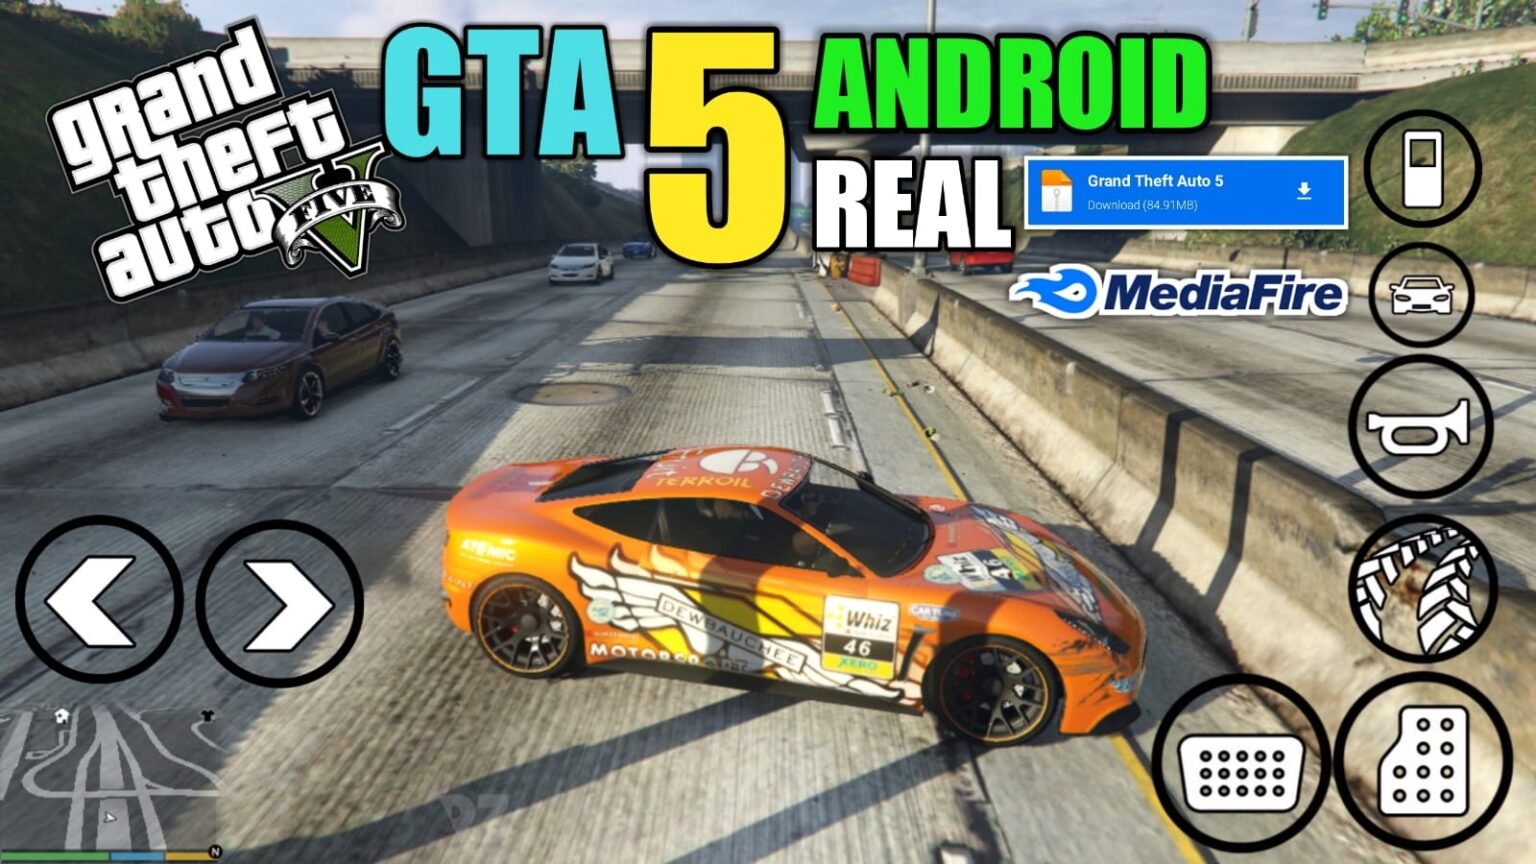 gta v for android apk data free download